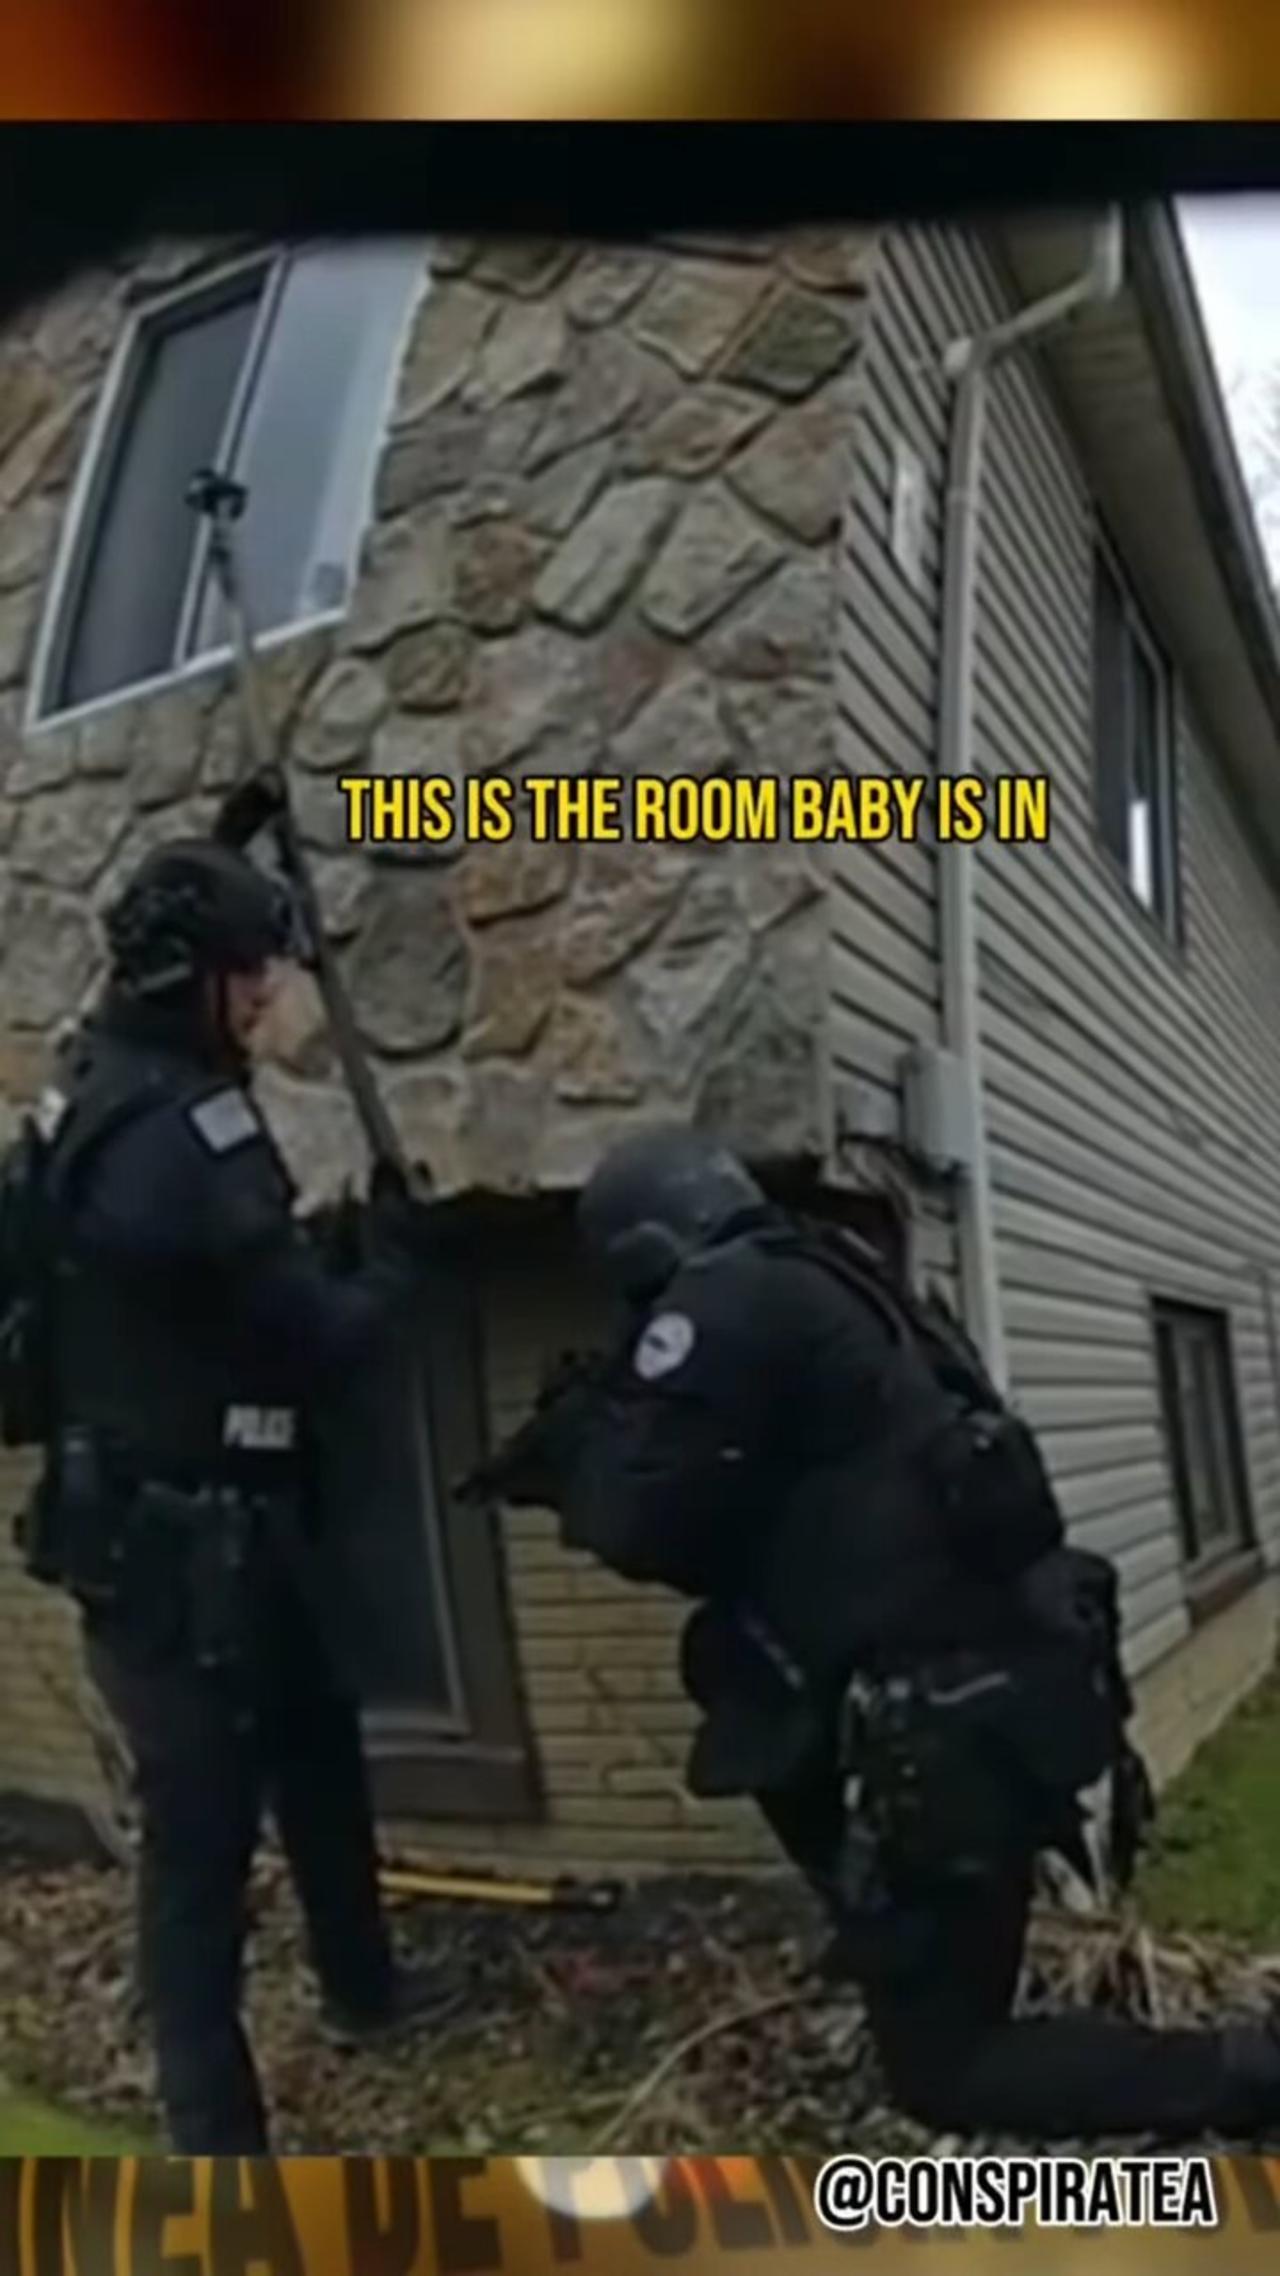 Elyria Ohio police execute a search warrant at the “wrong “house and injure special needs infant